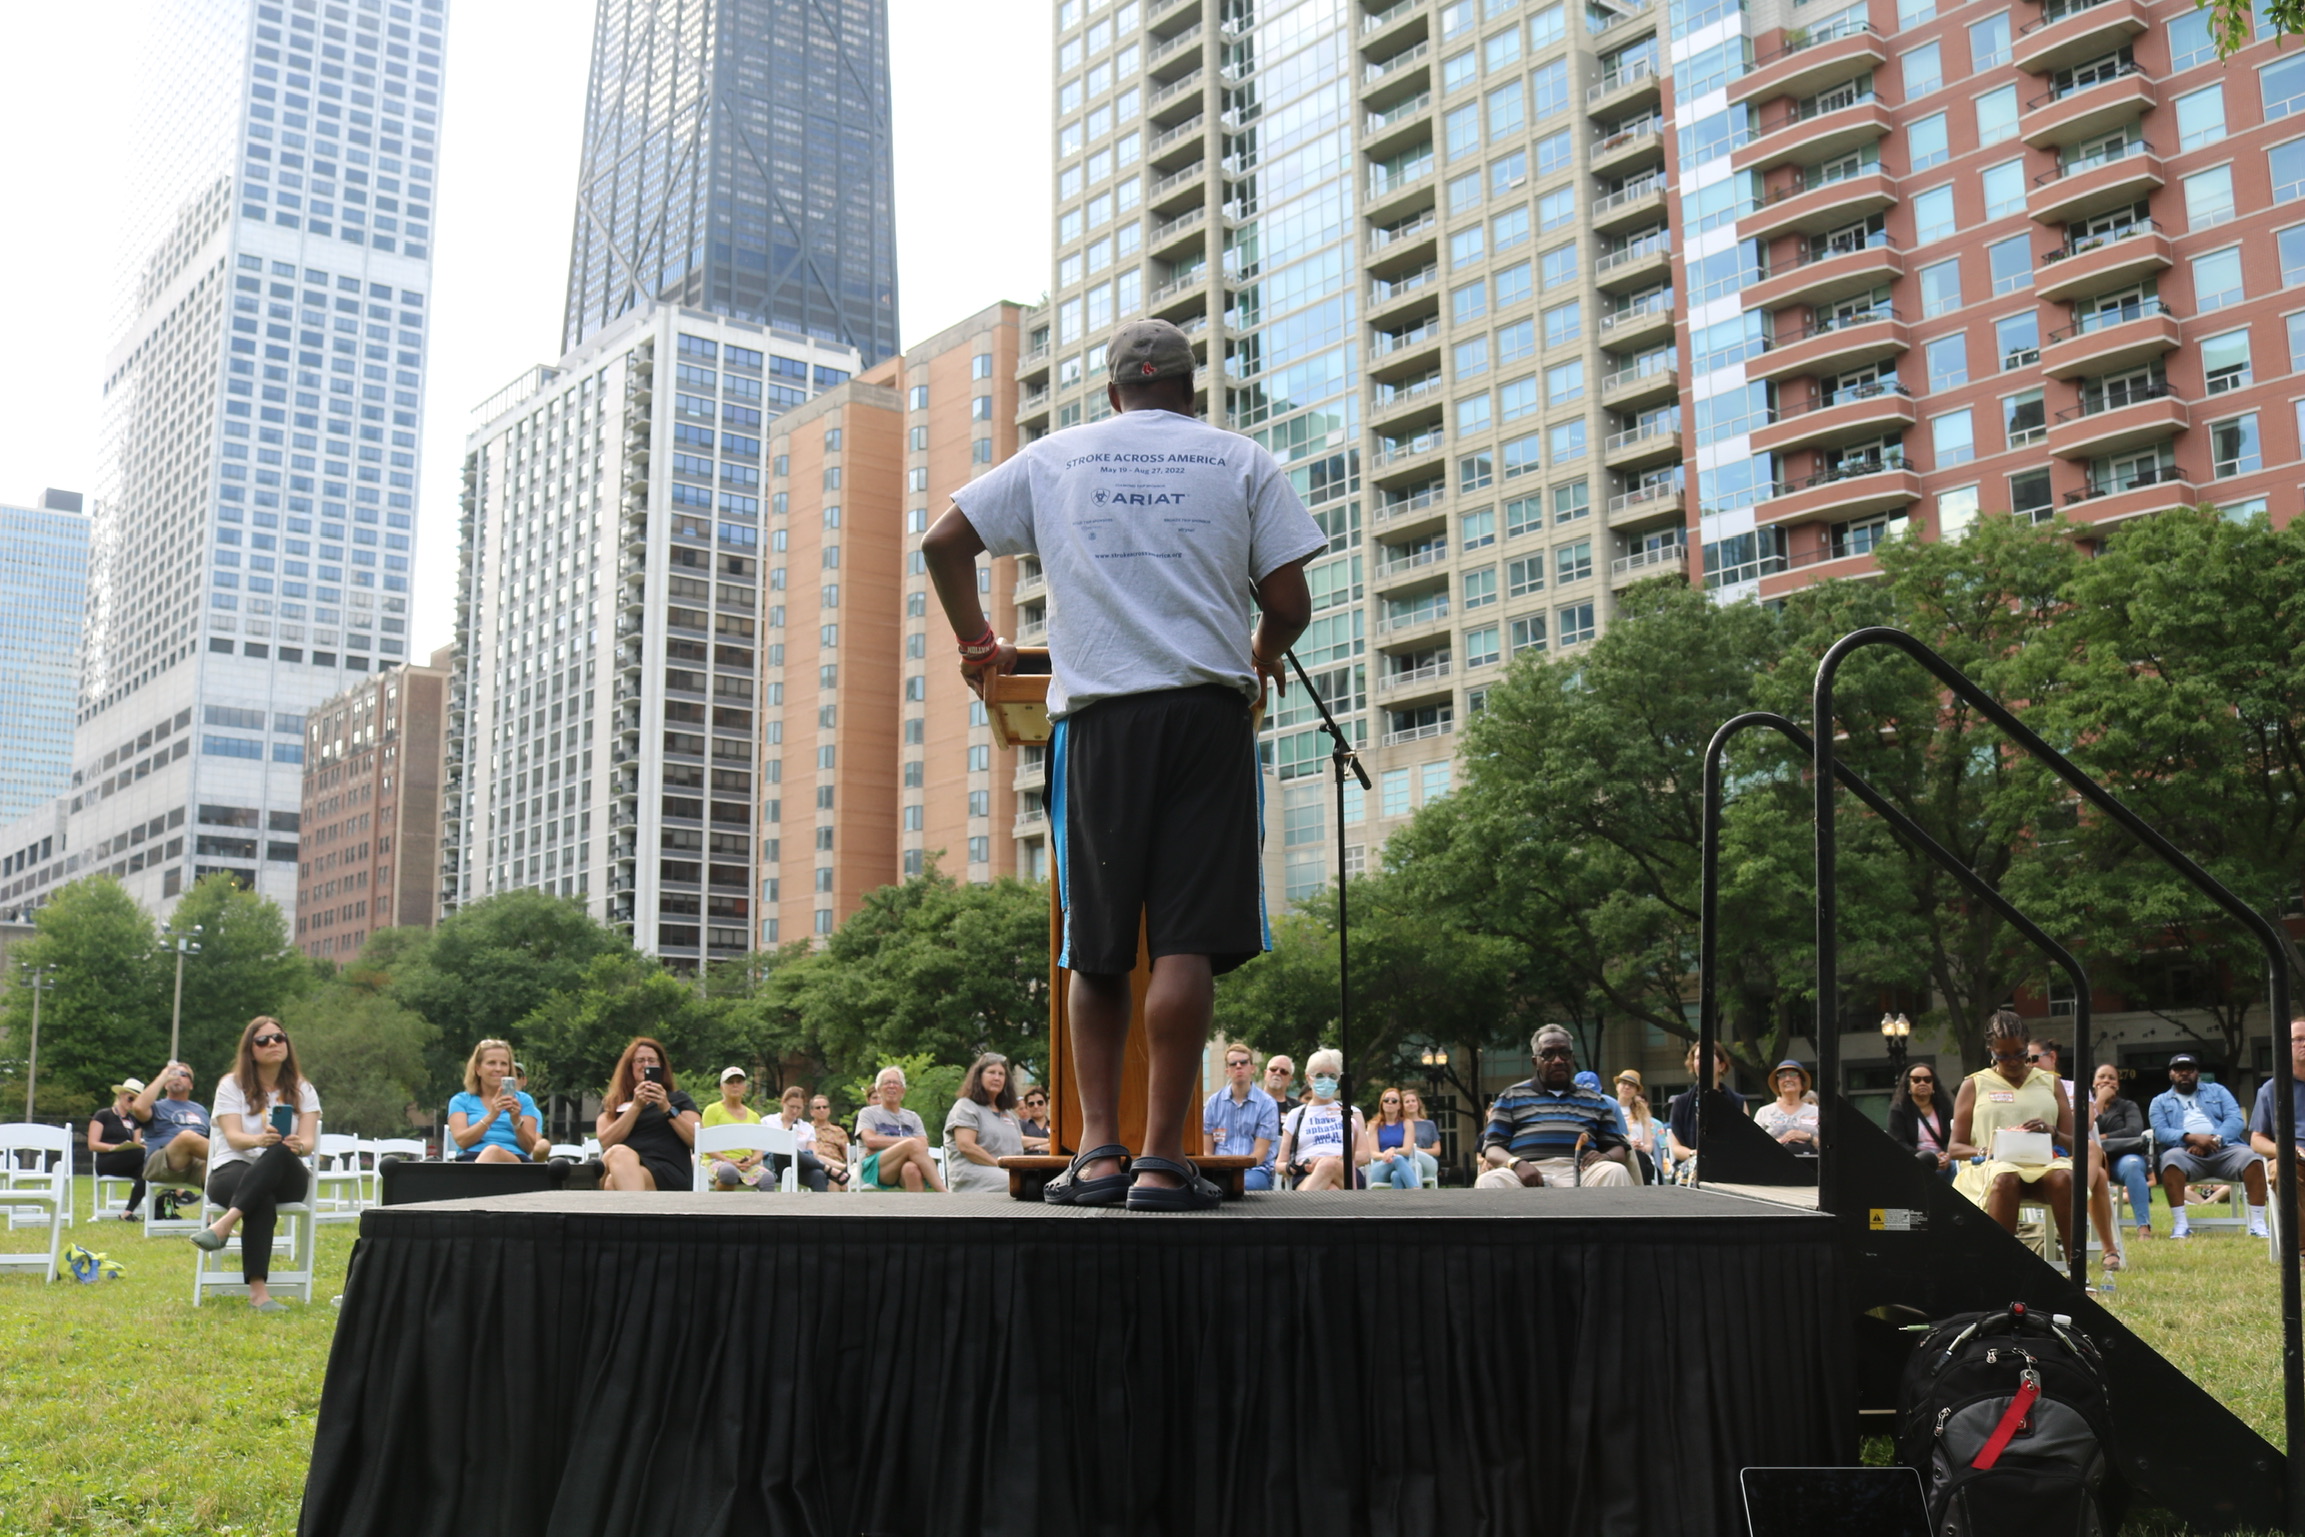 Michael speaking in Chicago at a Stroke Across America event